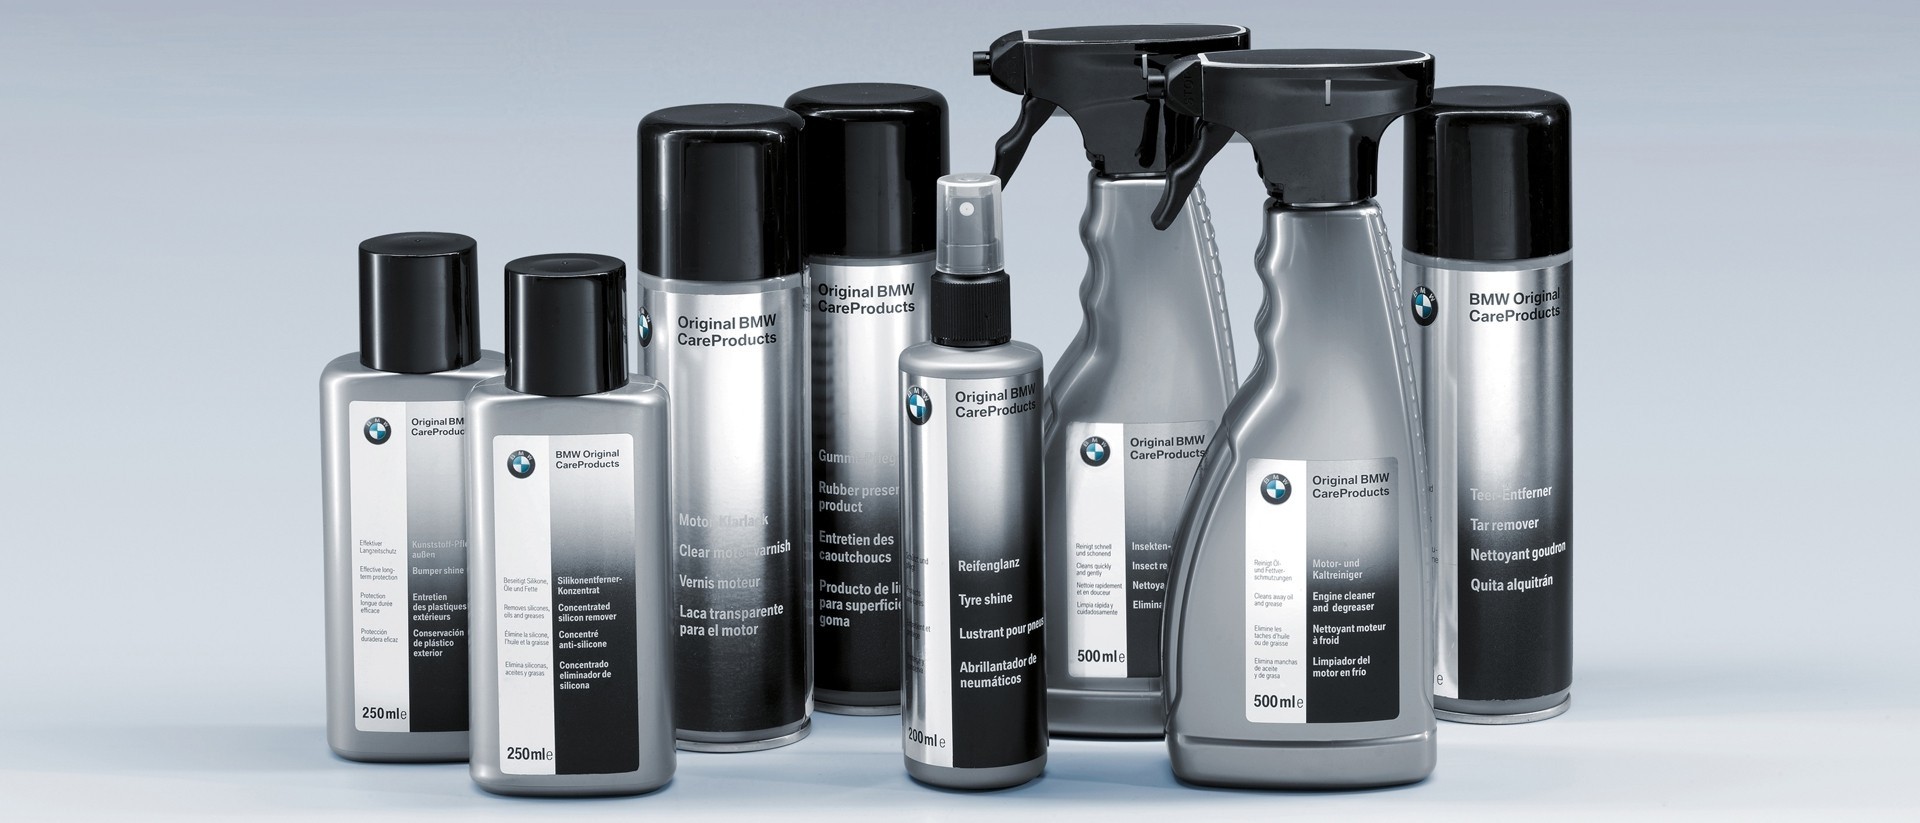 BMW Care Products